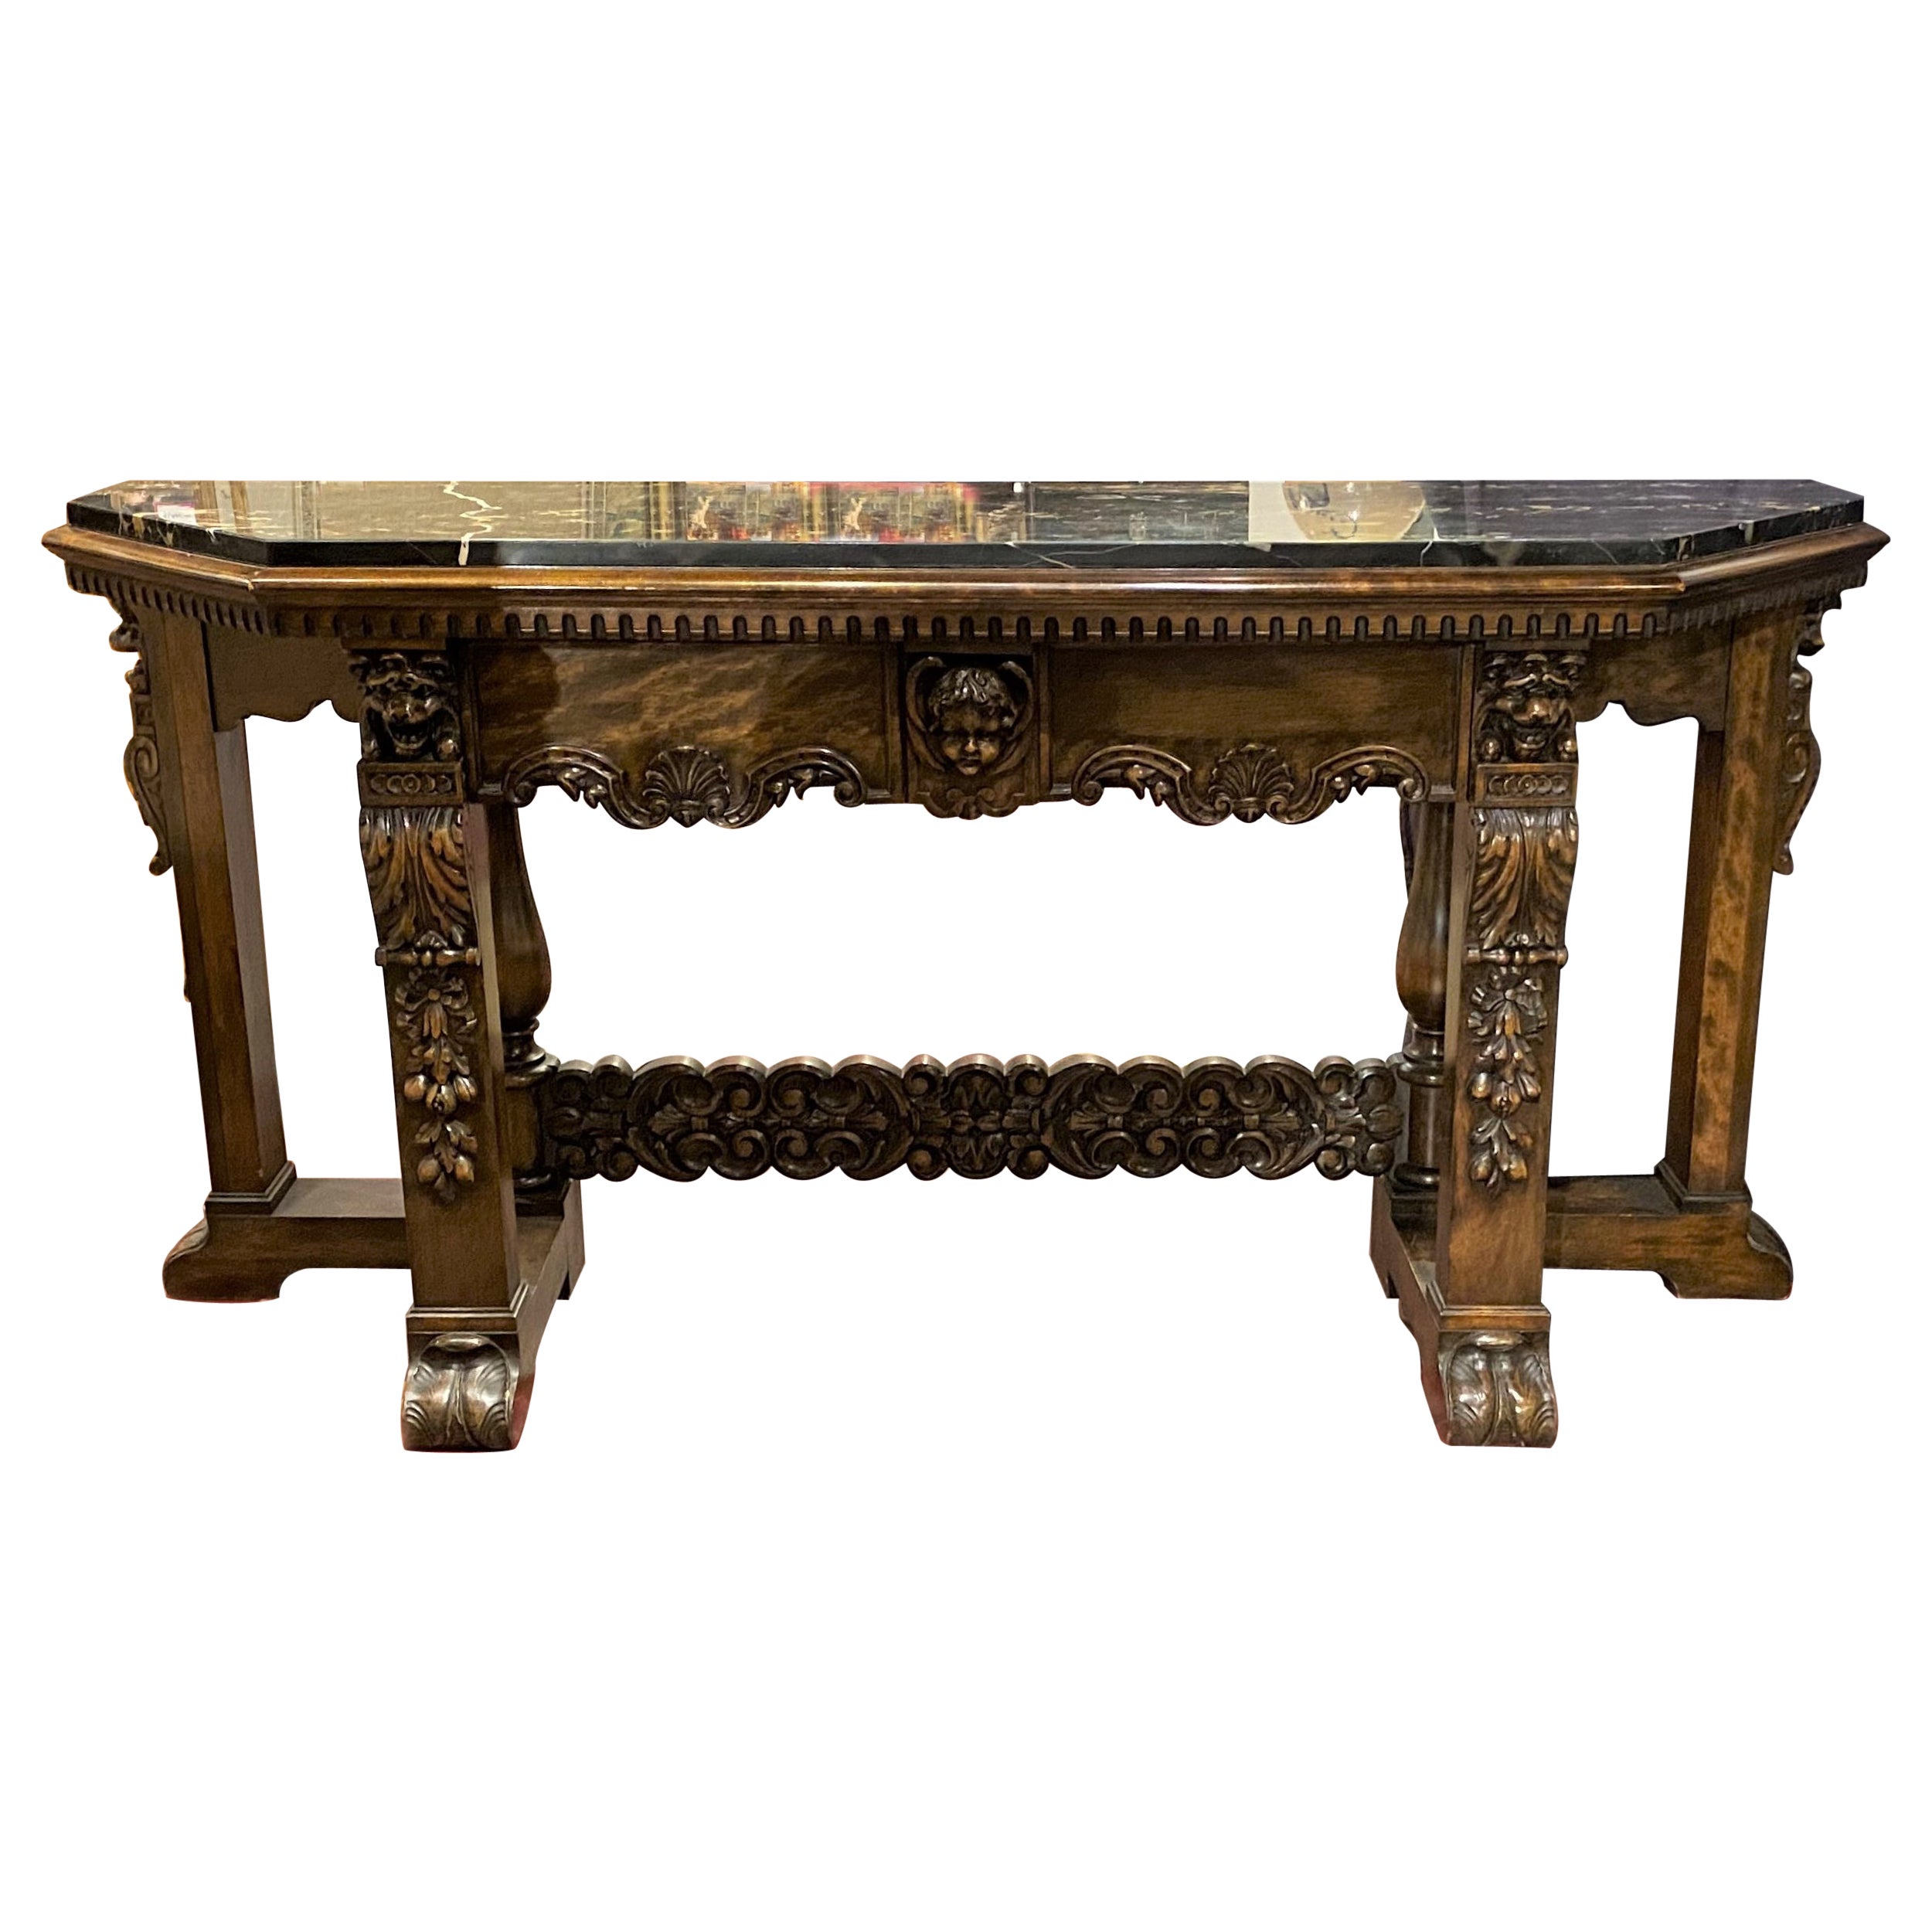 Mahogany Baroque Revival Marble Top Console Table with Lion & Acanthus Carving